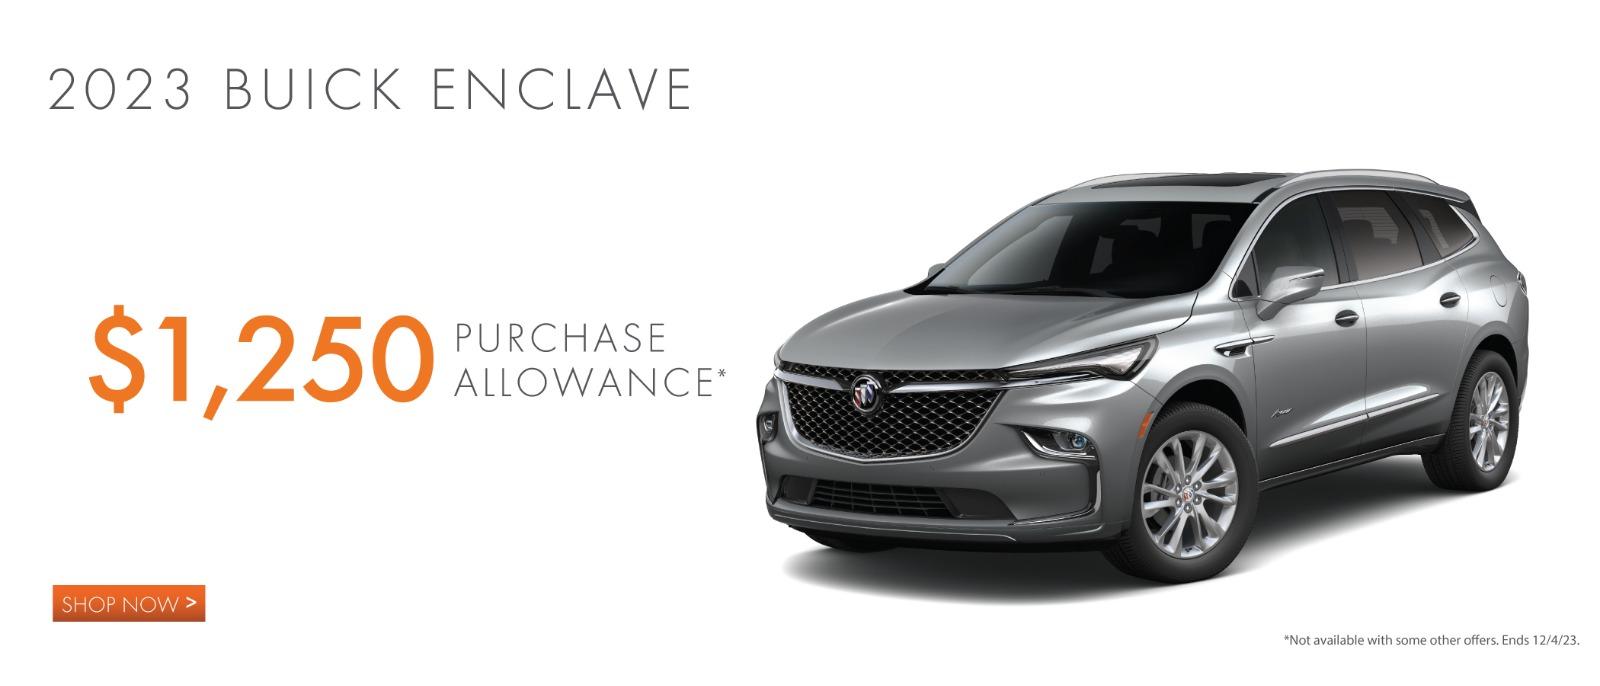 2023 Buick Enclave $1,250 Purchase Allowance